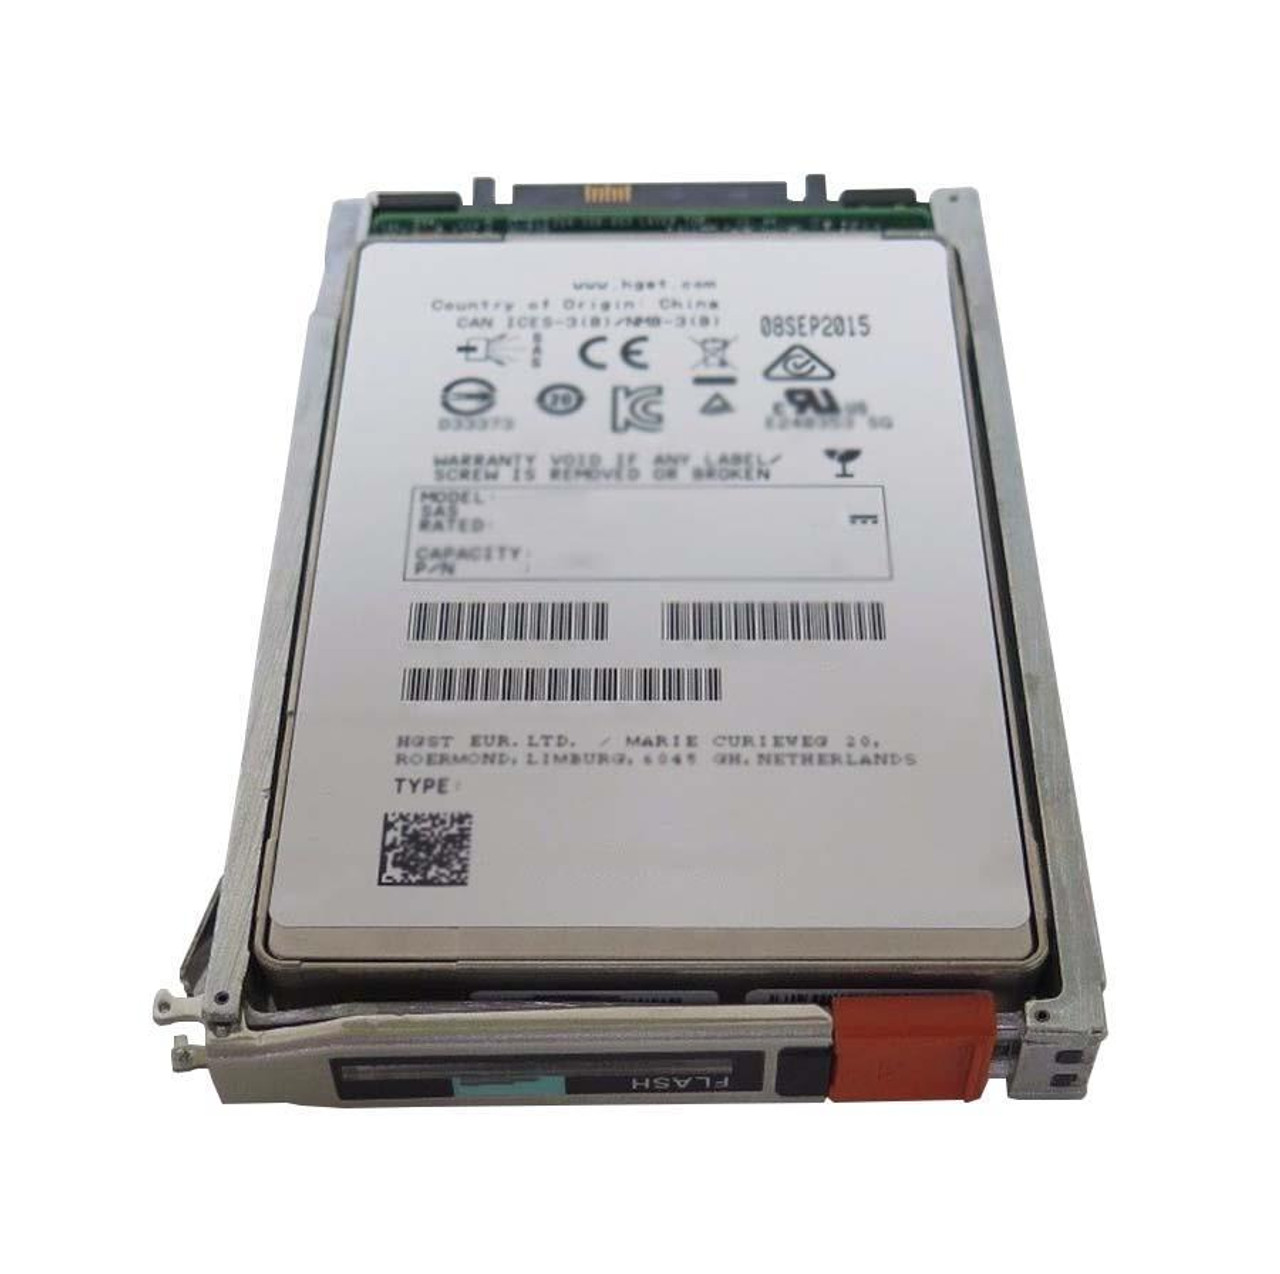 V4-D2S6FX-400TU EMC 400GB SAS 6Gbps 2.5-inch Internal Solid State Drive (SSD) Upgrade for VNX FAST VP 120 x 2.5 Enclosure